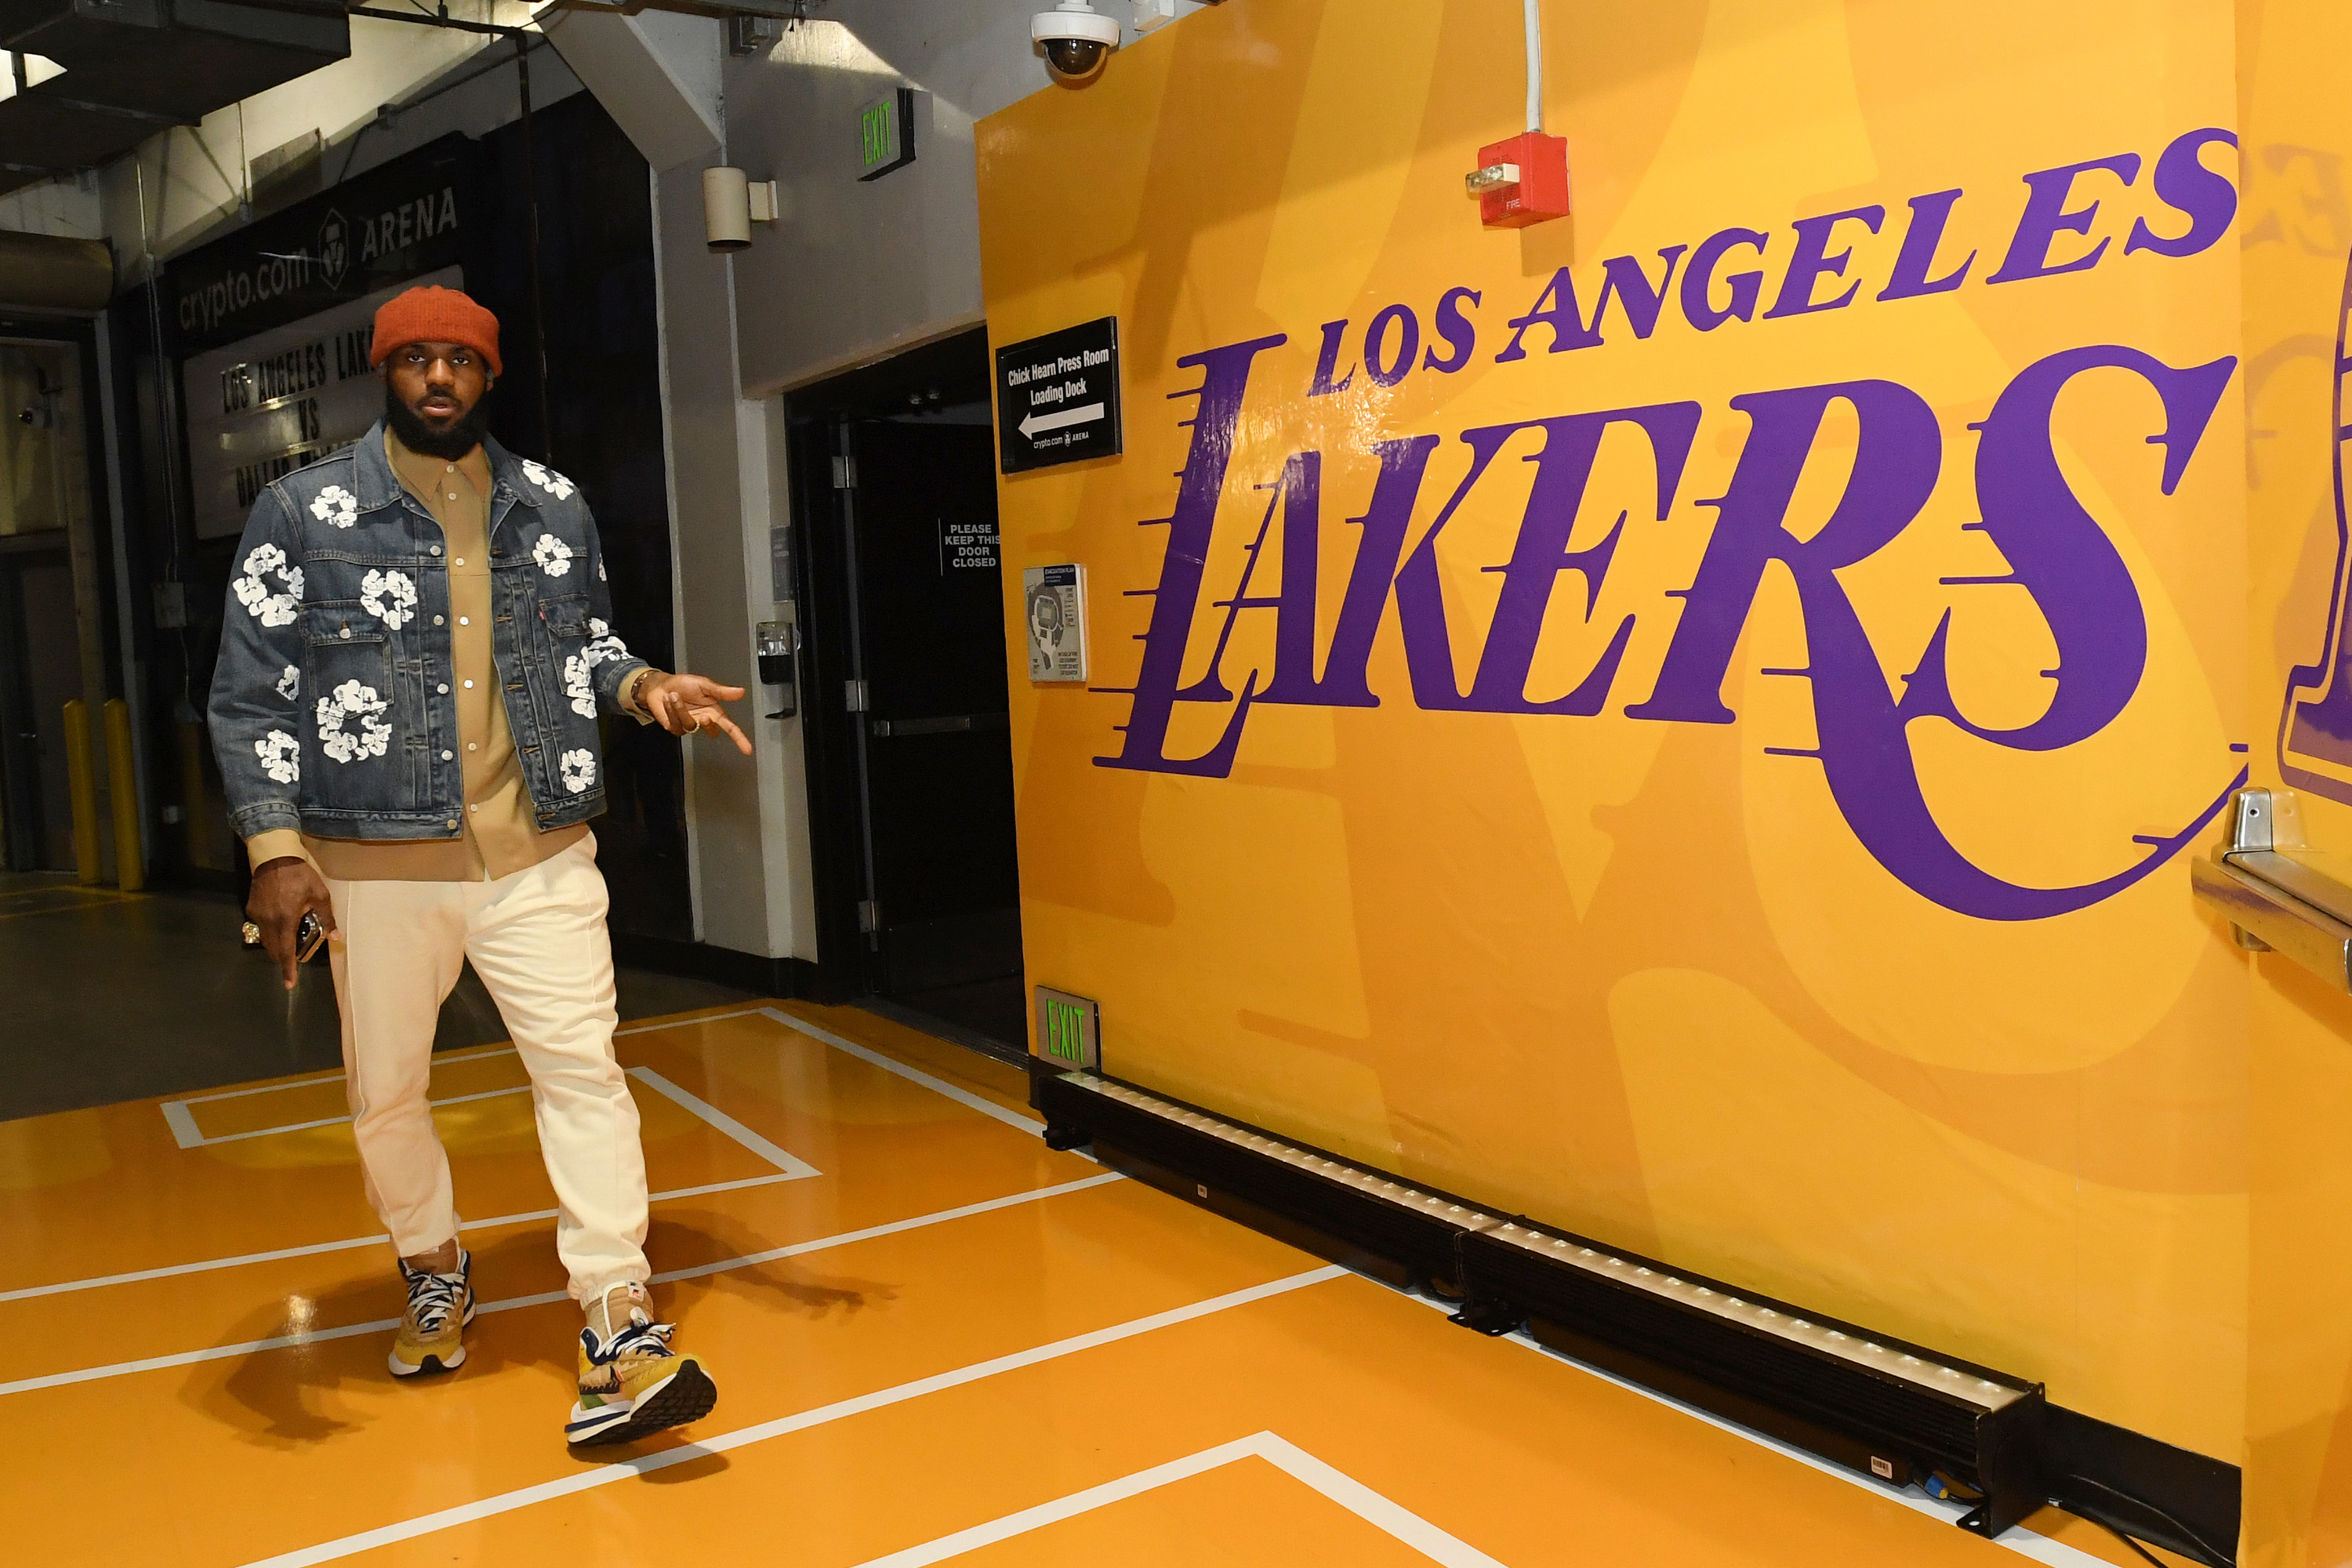 Lebron James walking in the Lakers tunnel.